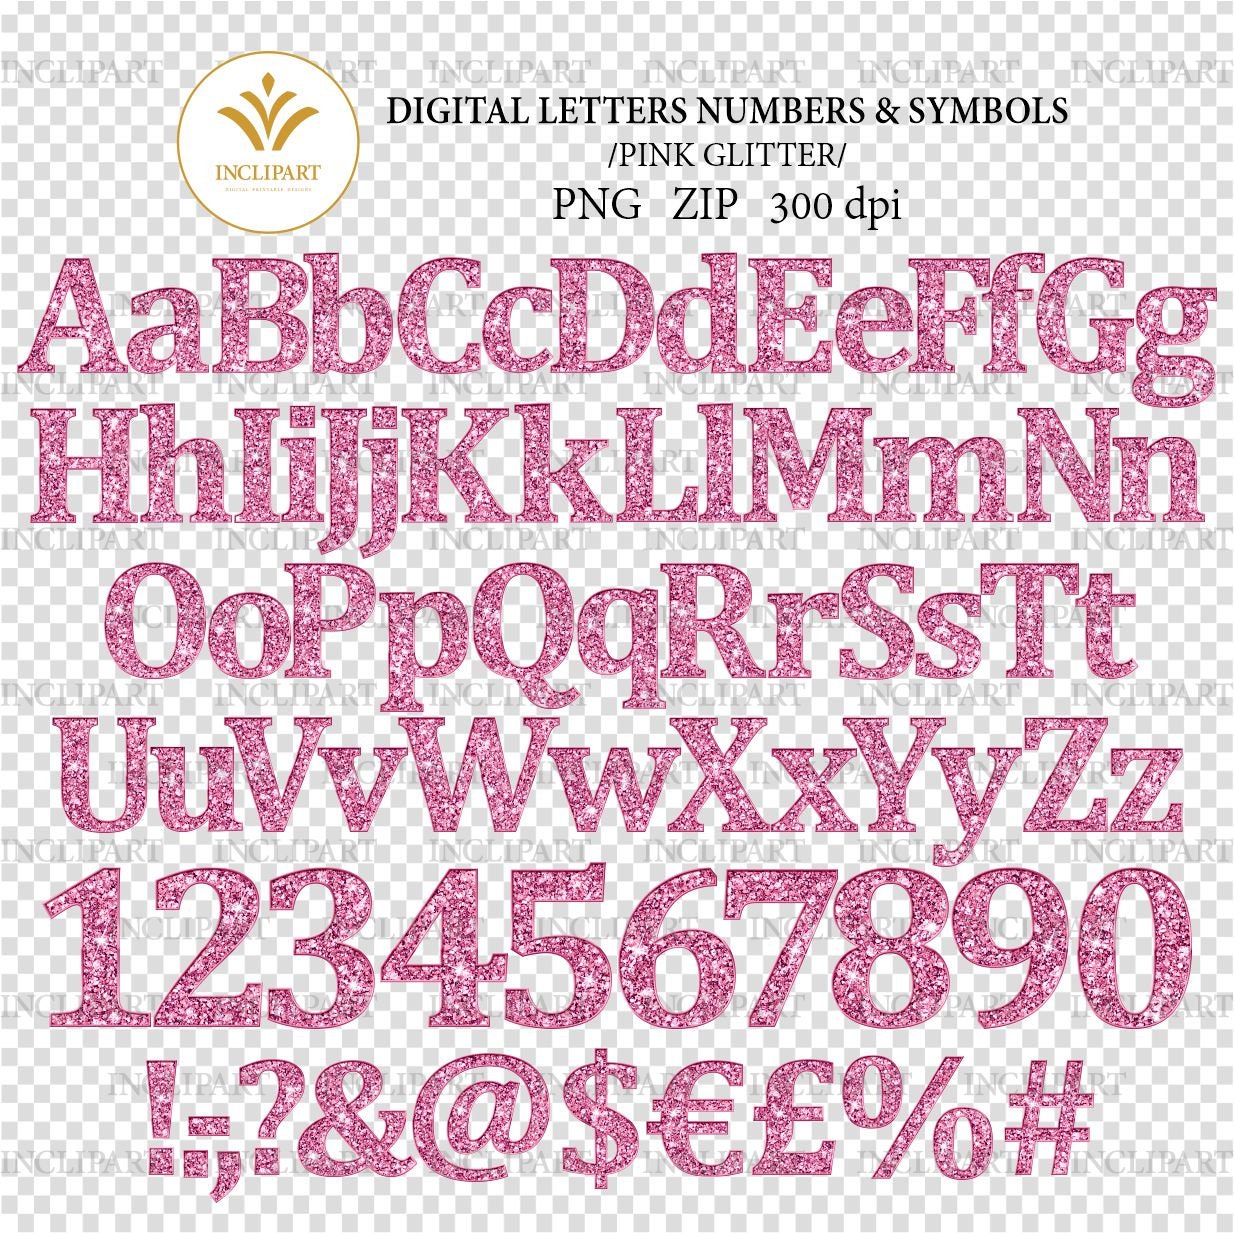 Pink Glitter Letters & Numbers  Illustrations ~ Creative Market